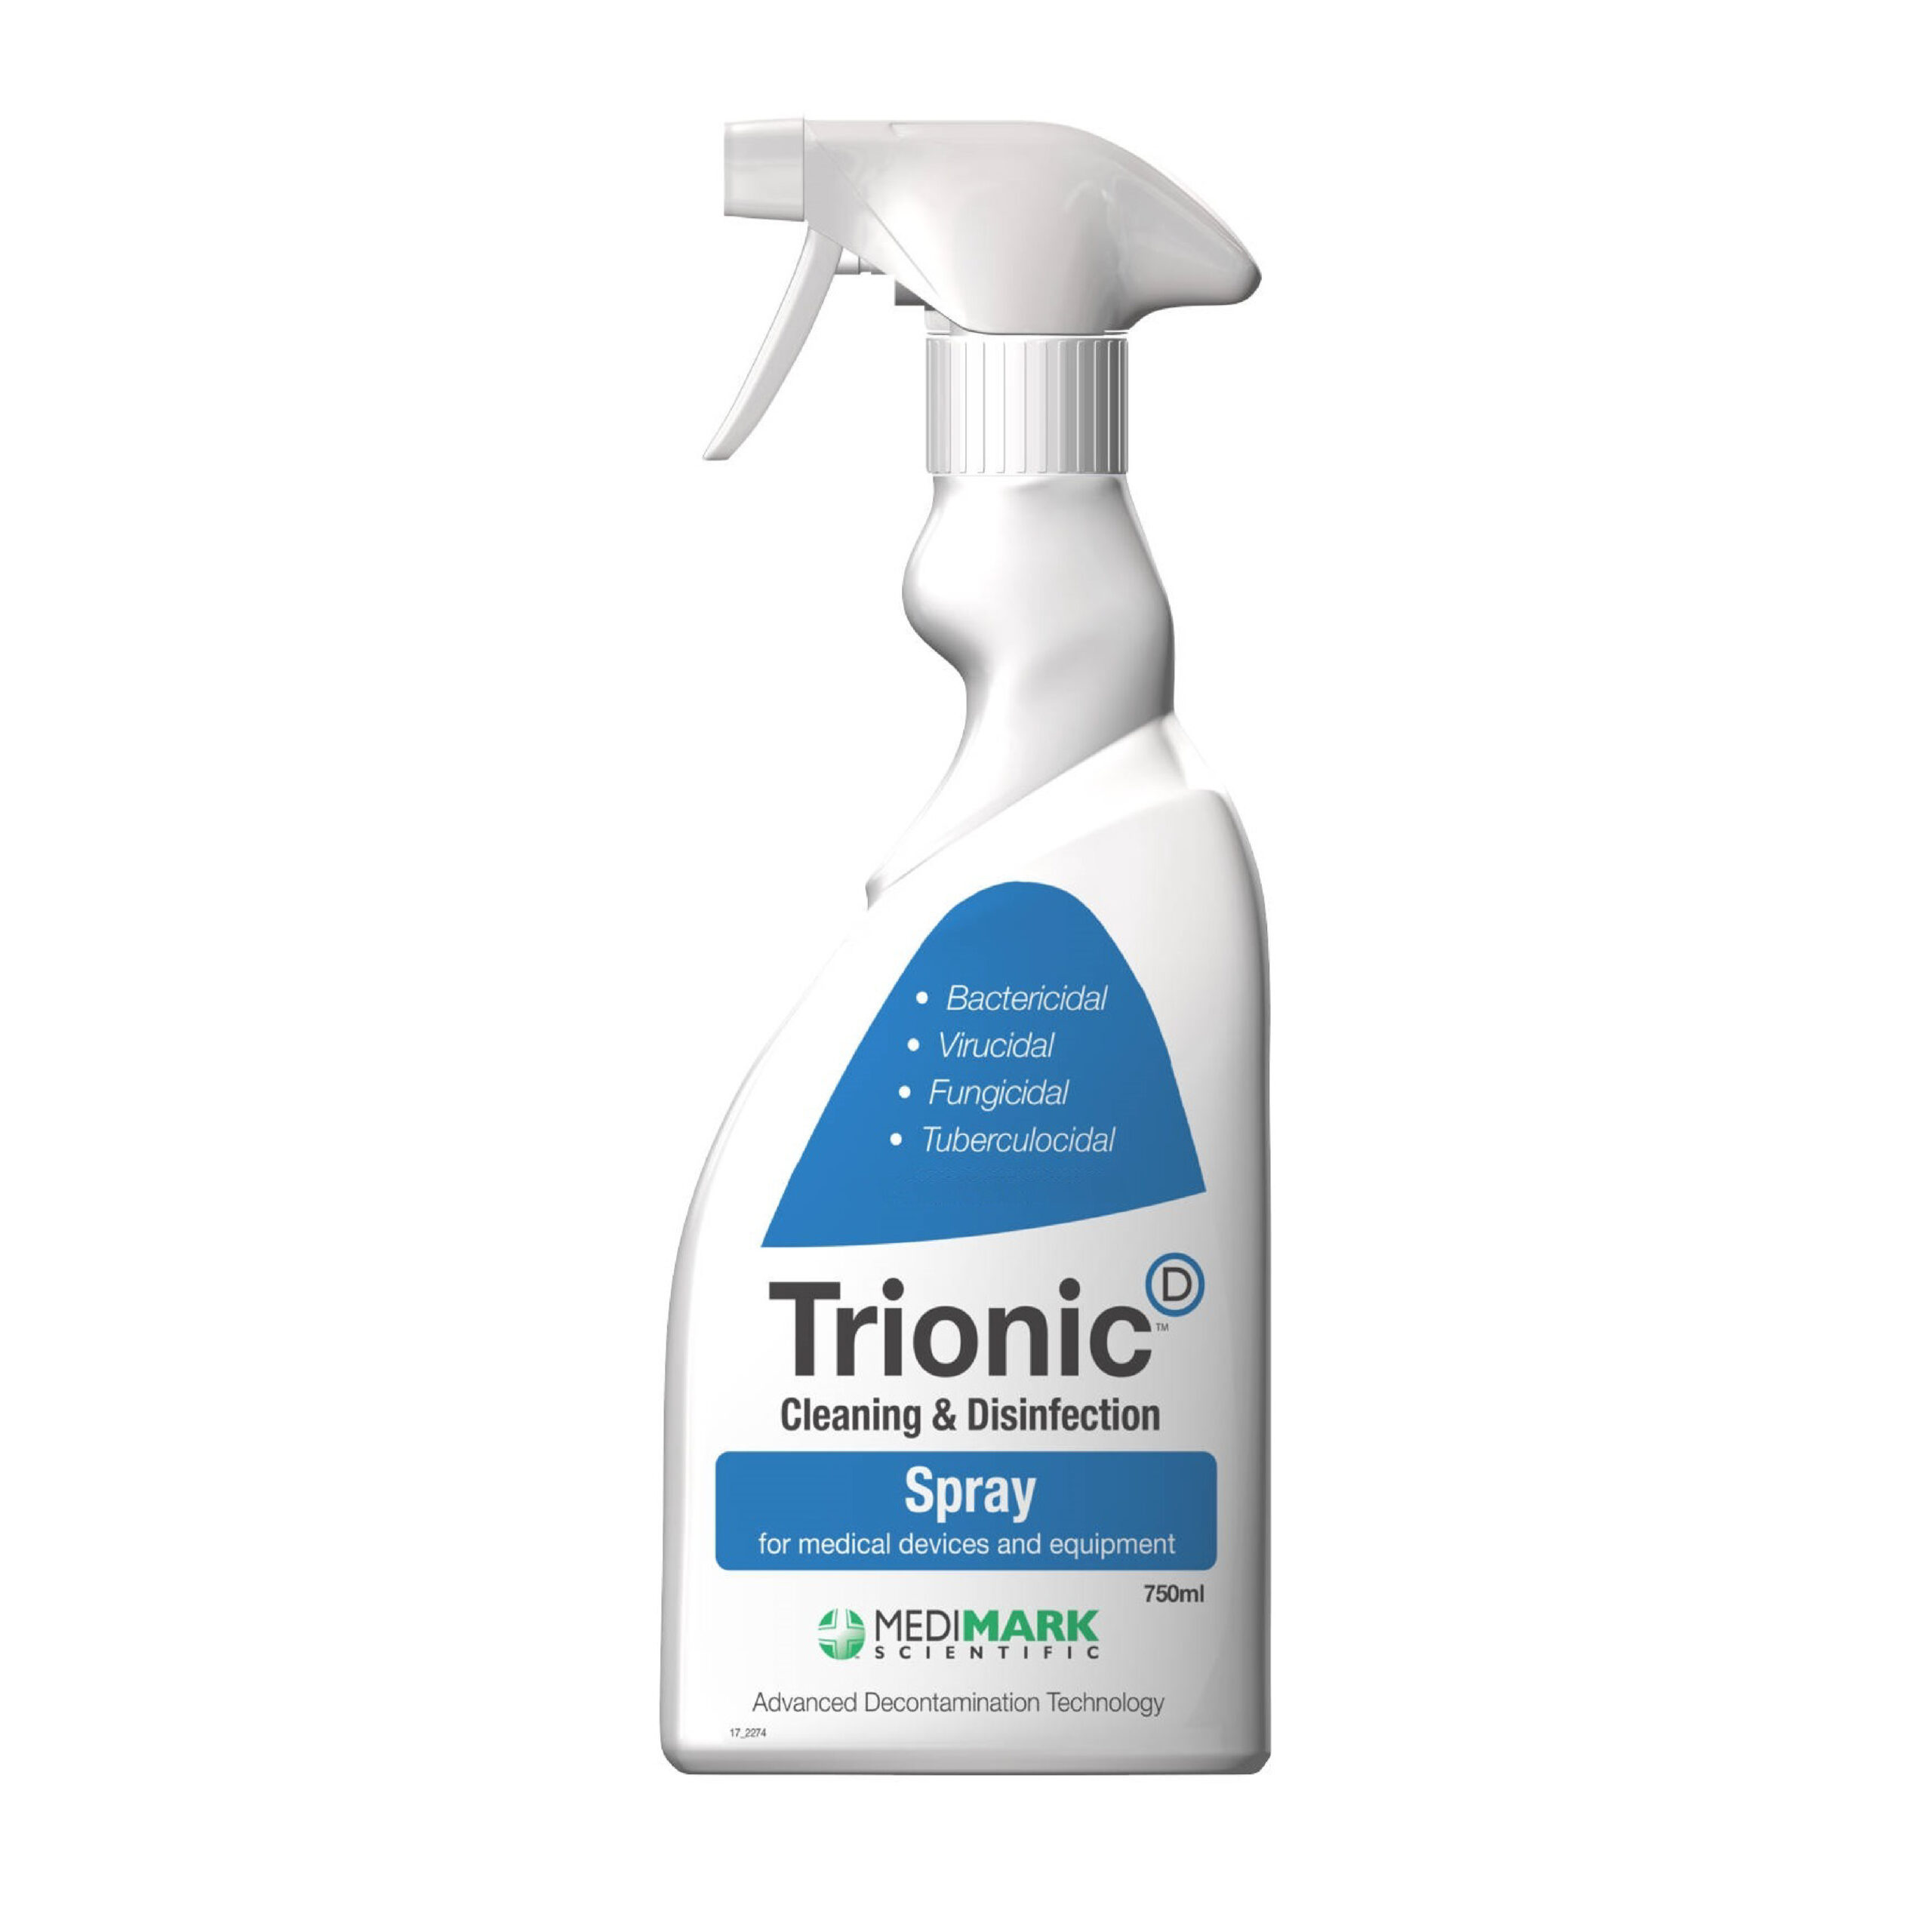 Trionic Cleaning & Disinfection Spray CE